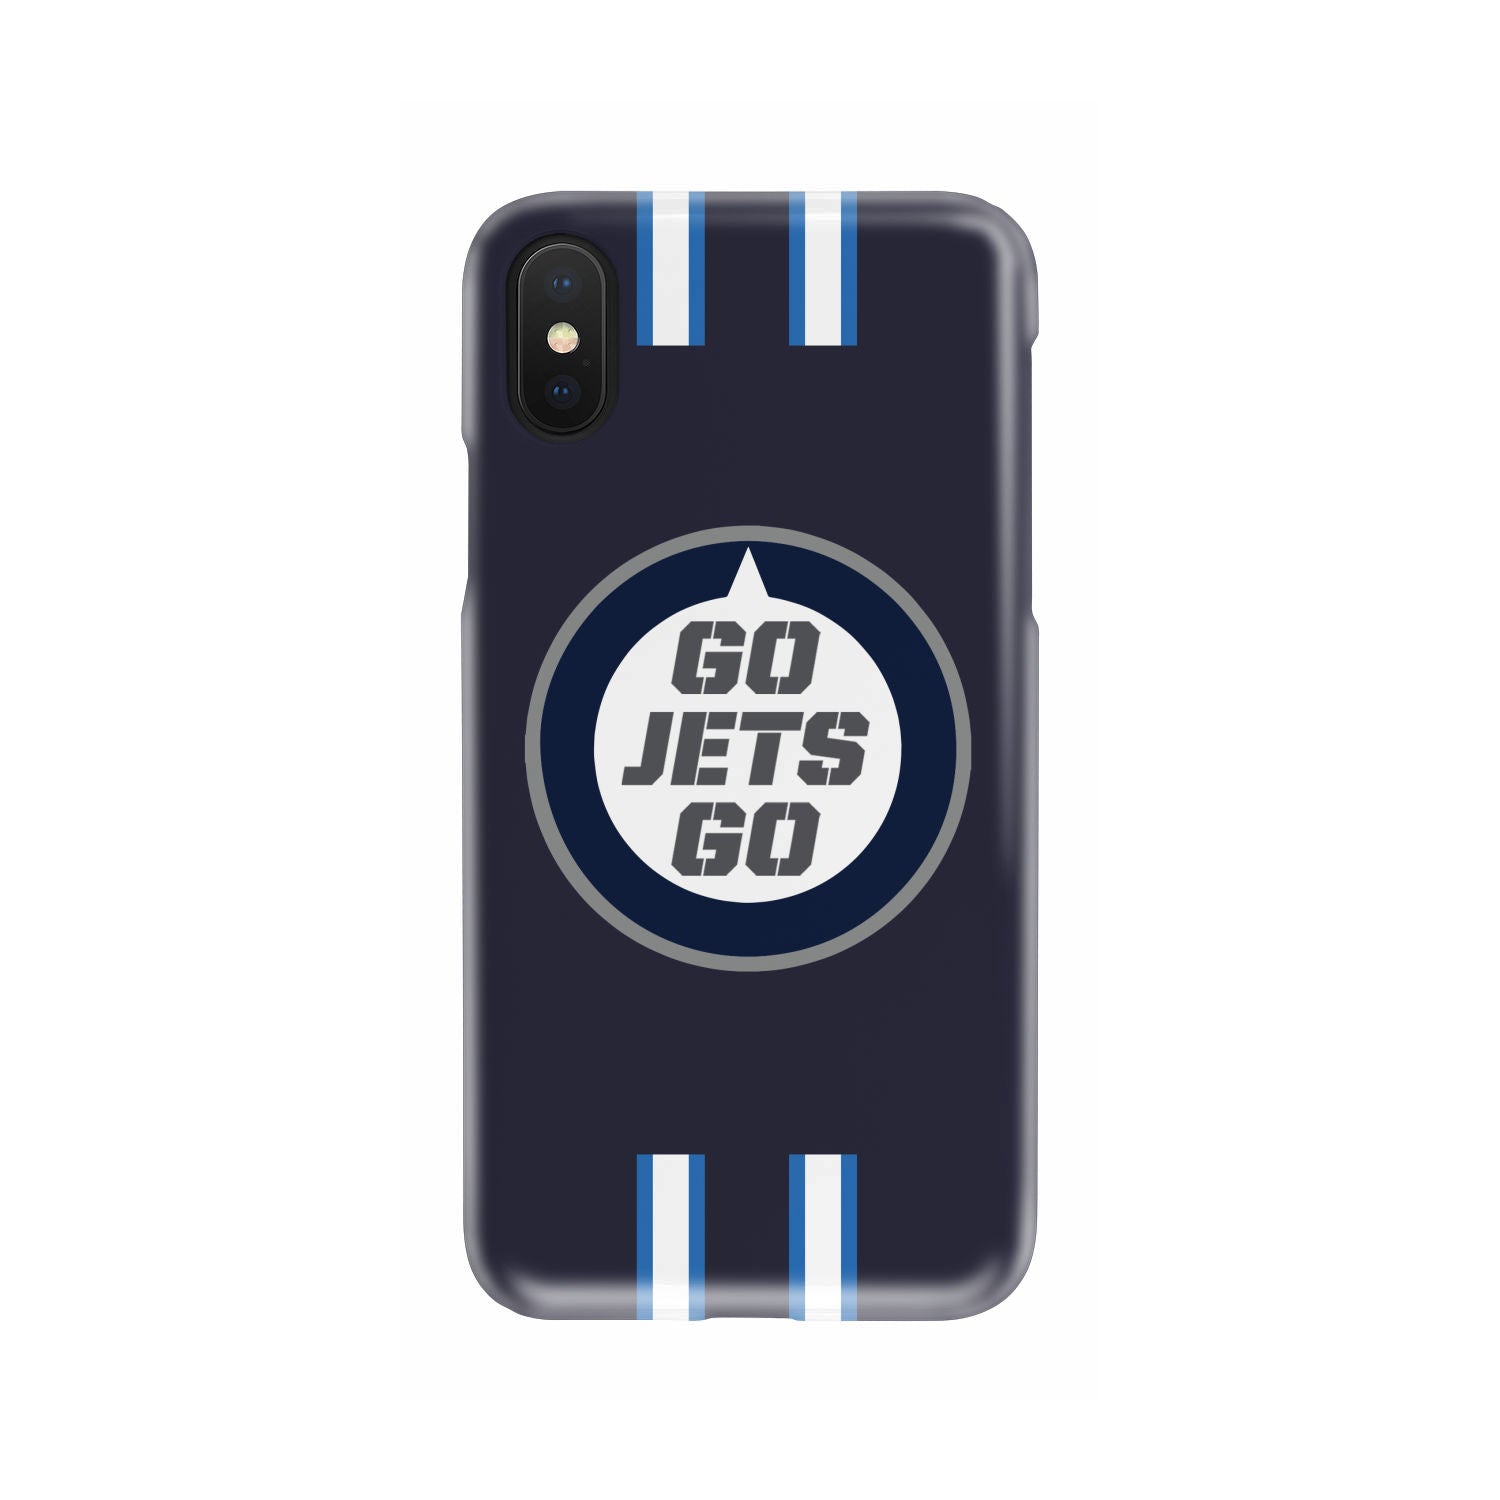 A custom-designed classic Exclusive for Fans phone case